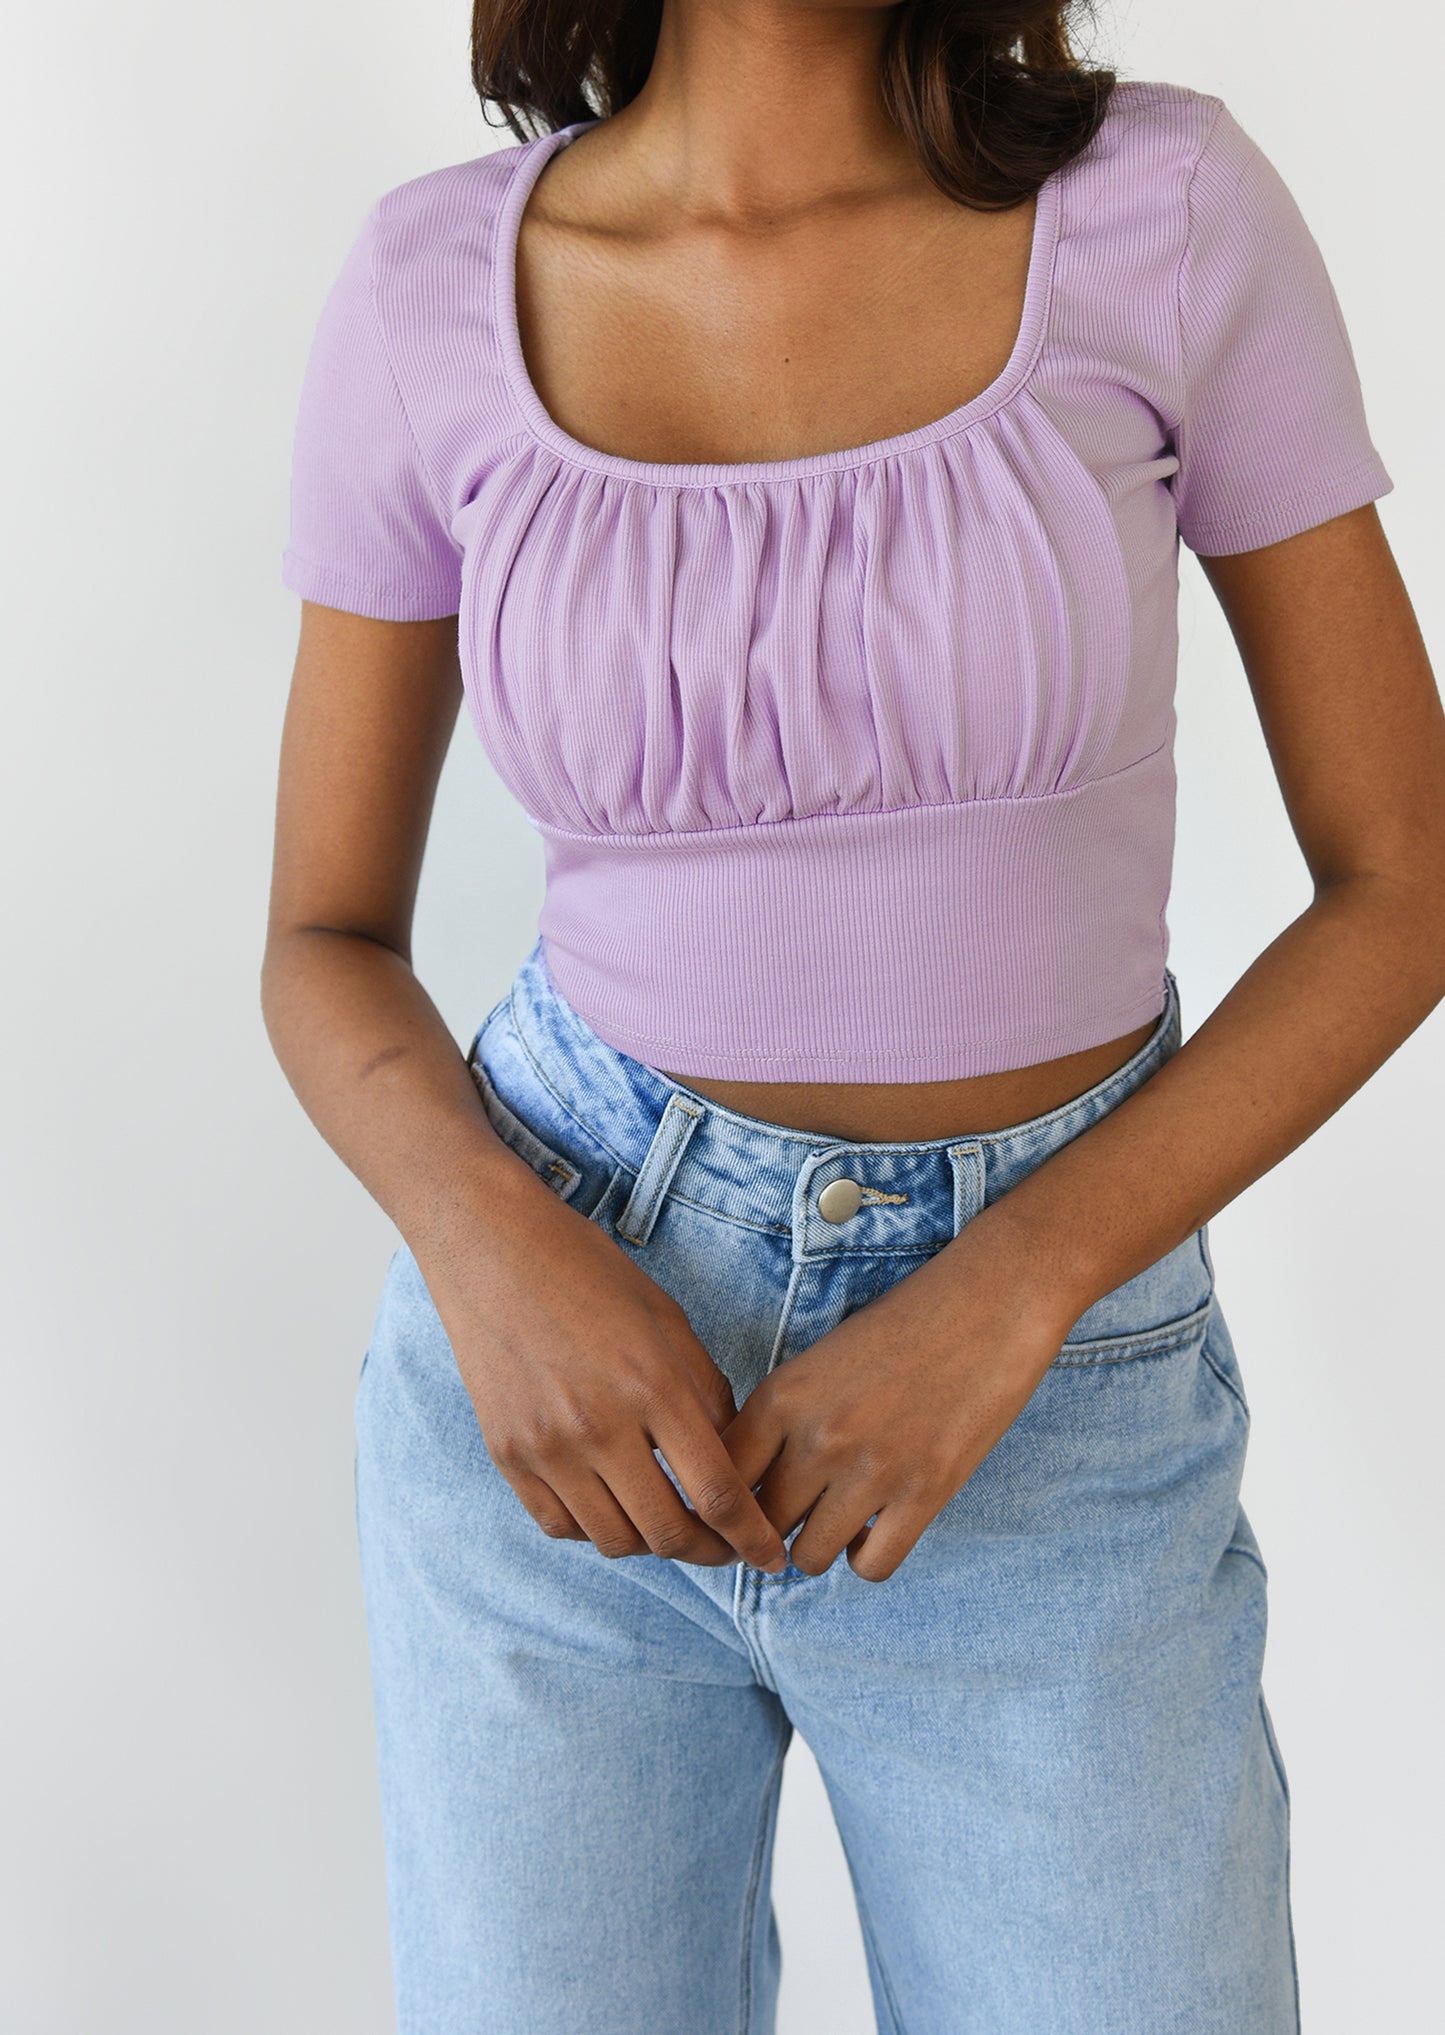 Ruched t-shirt in lilac